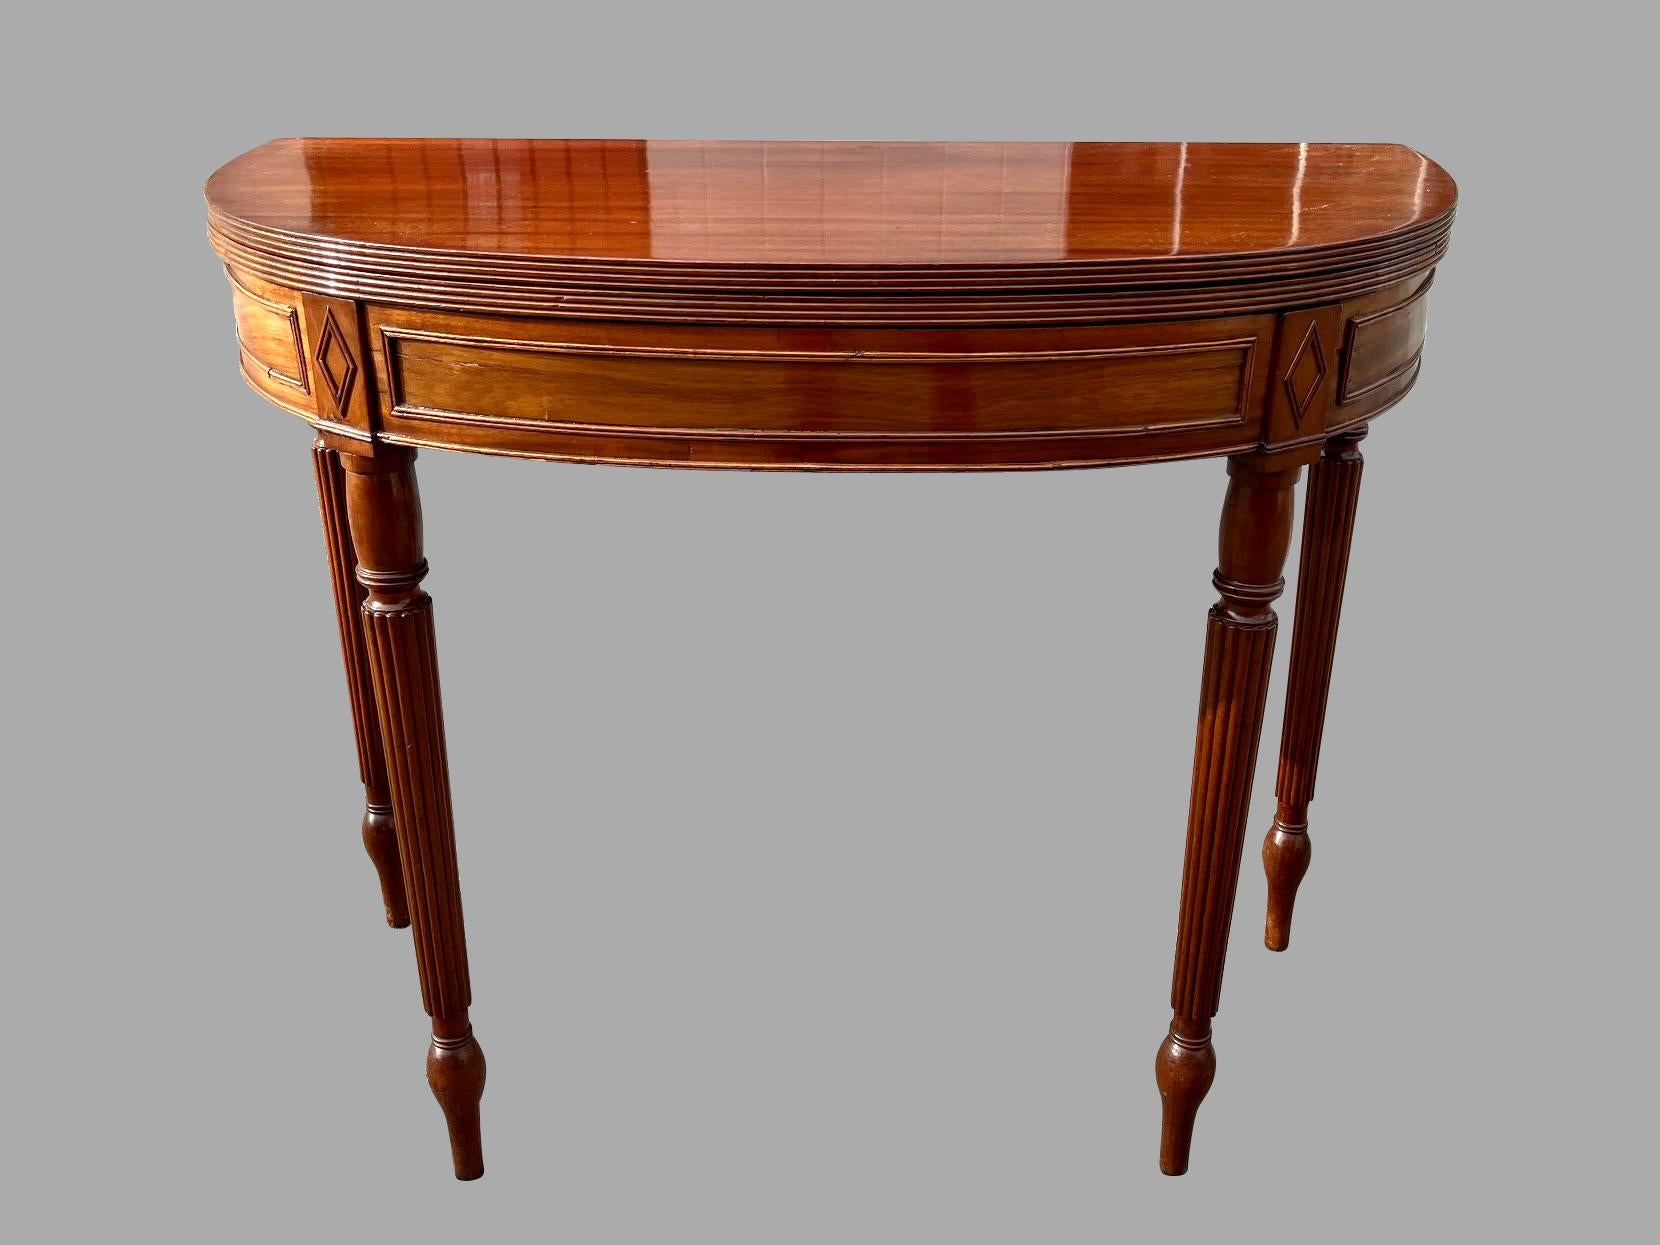 A fine English Regency period flip top games table, the solid mahogany top with a reeded edge above a curved base embellished with mouldings, all supported on reeded legs ending in elongated toupie feet. The top folds open and is supported by 2